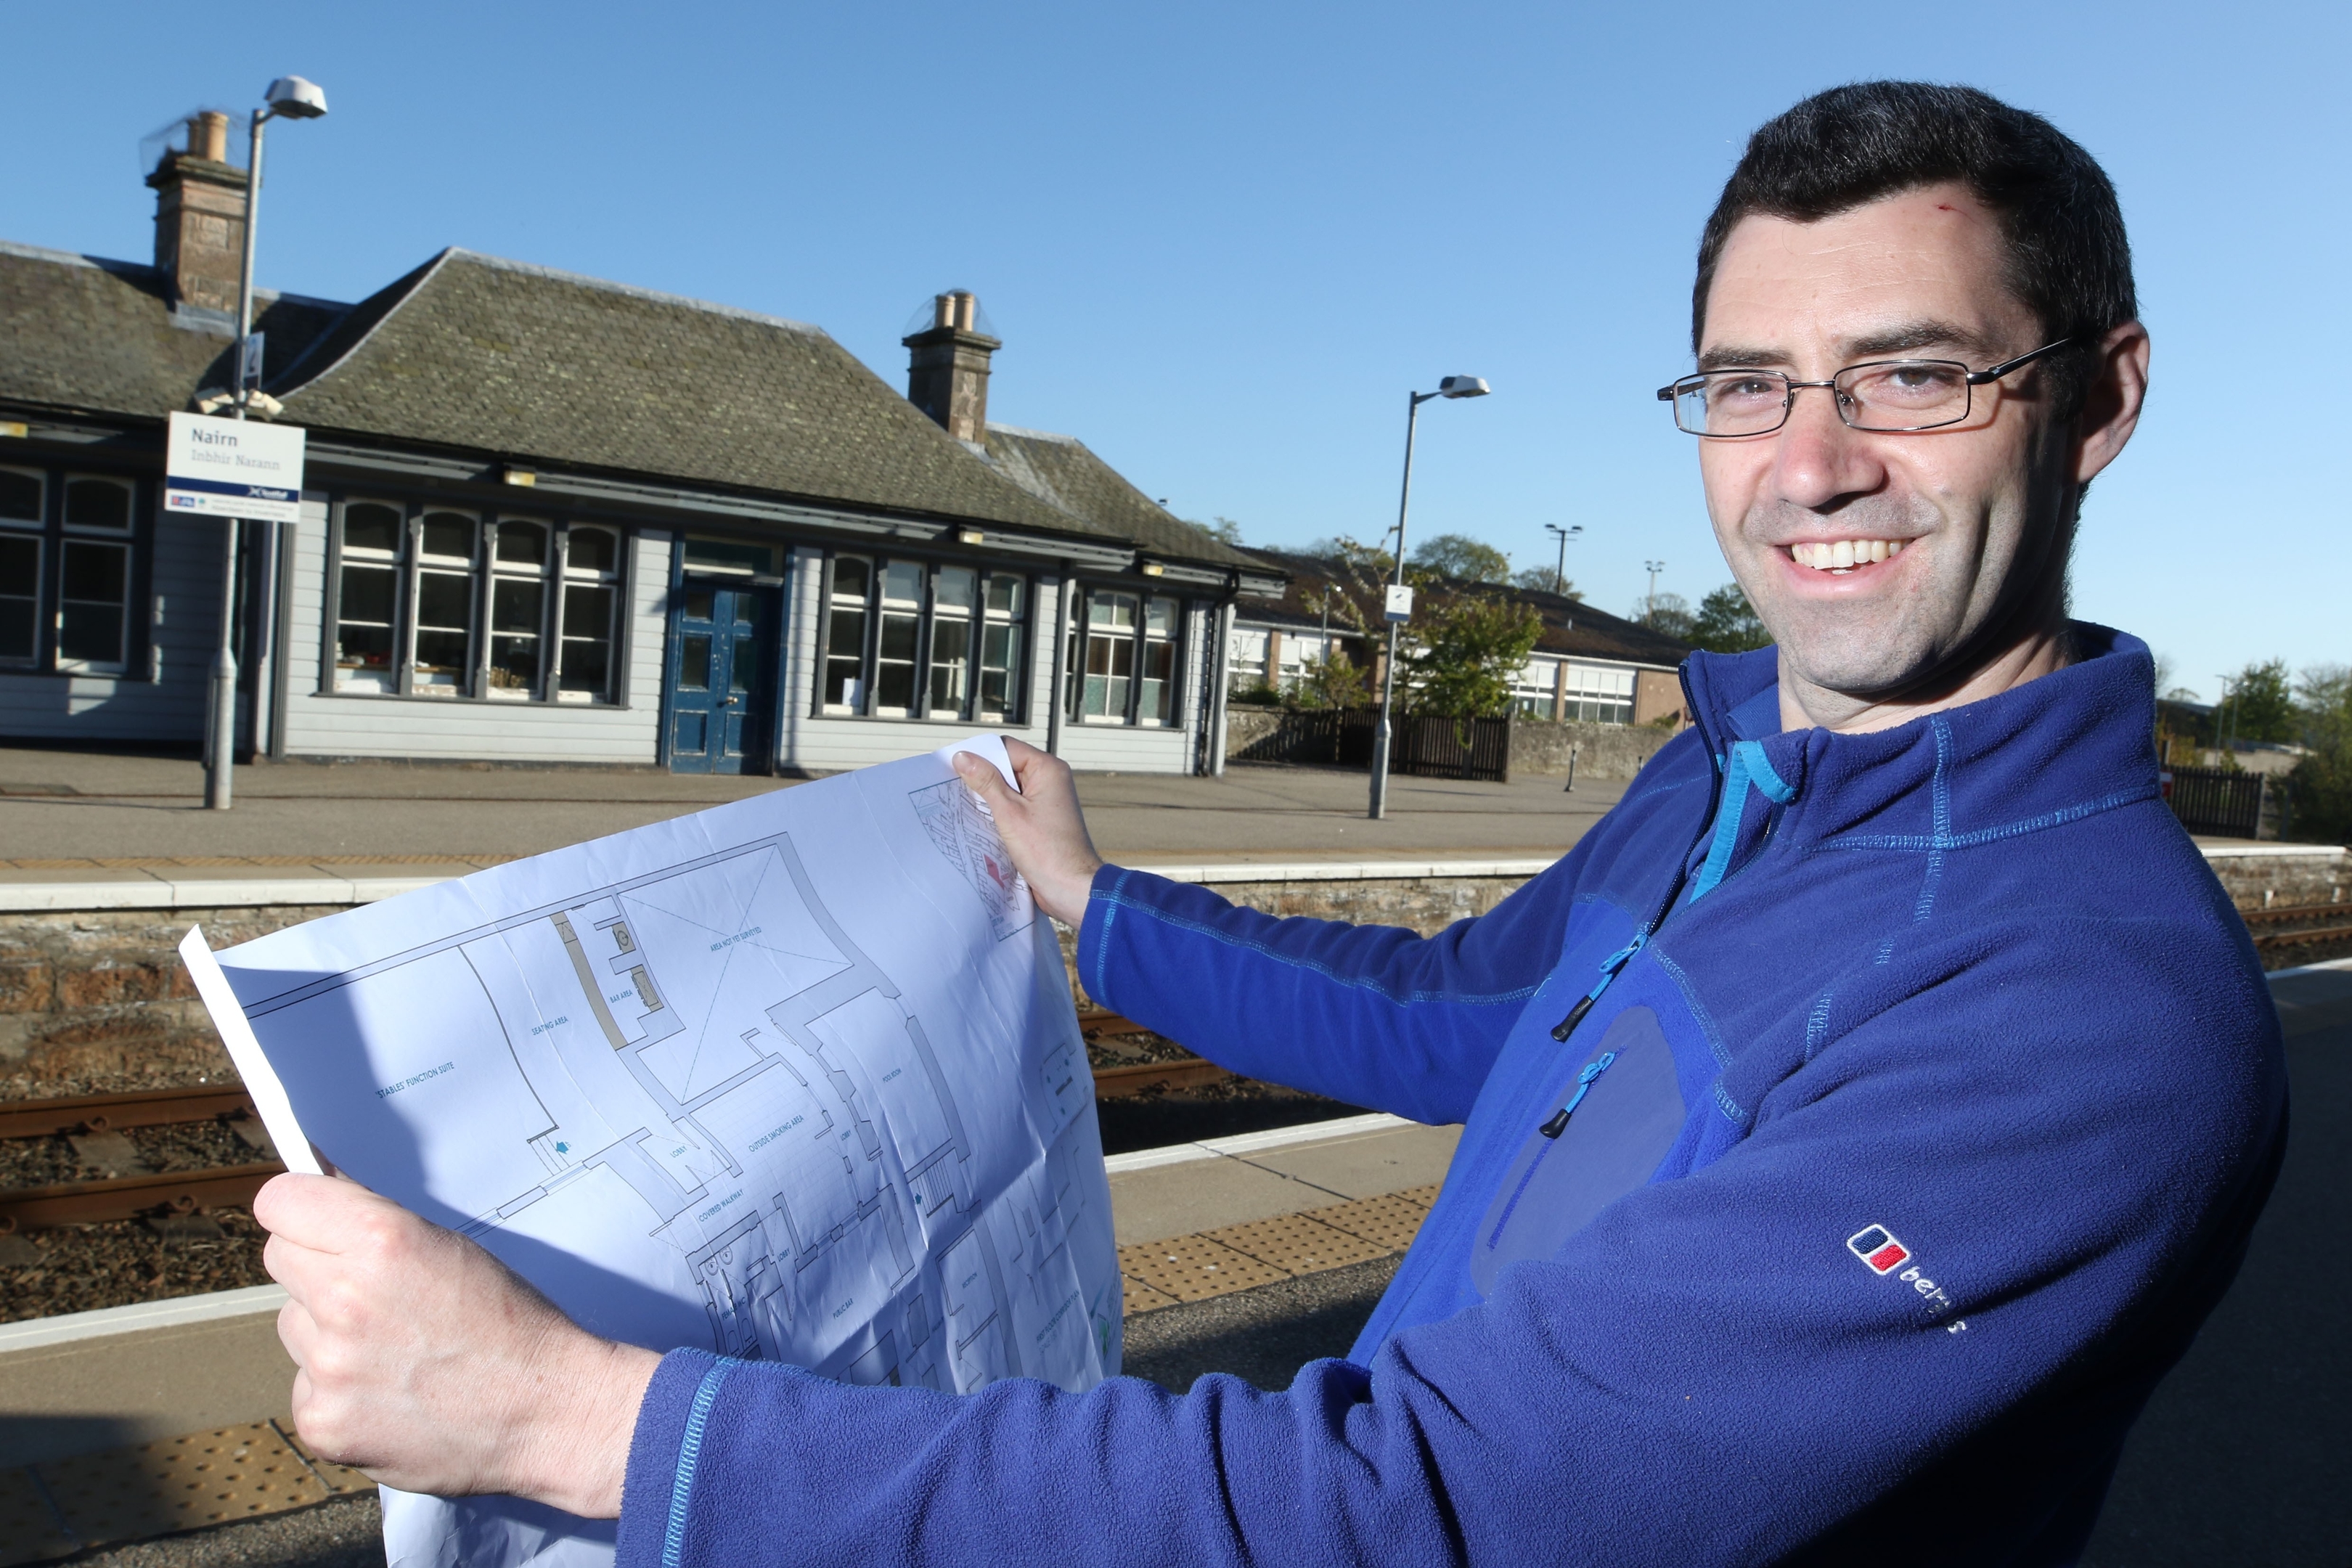 Matthew Hilton at the possible site of the new Men's Shed in Nairn, in the old Seedhouse florist's building at the train station.